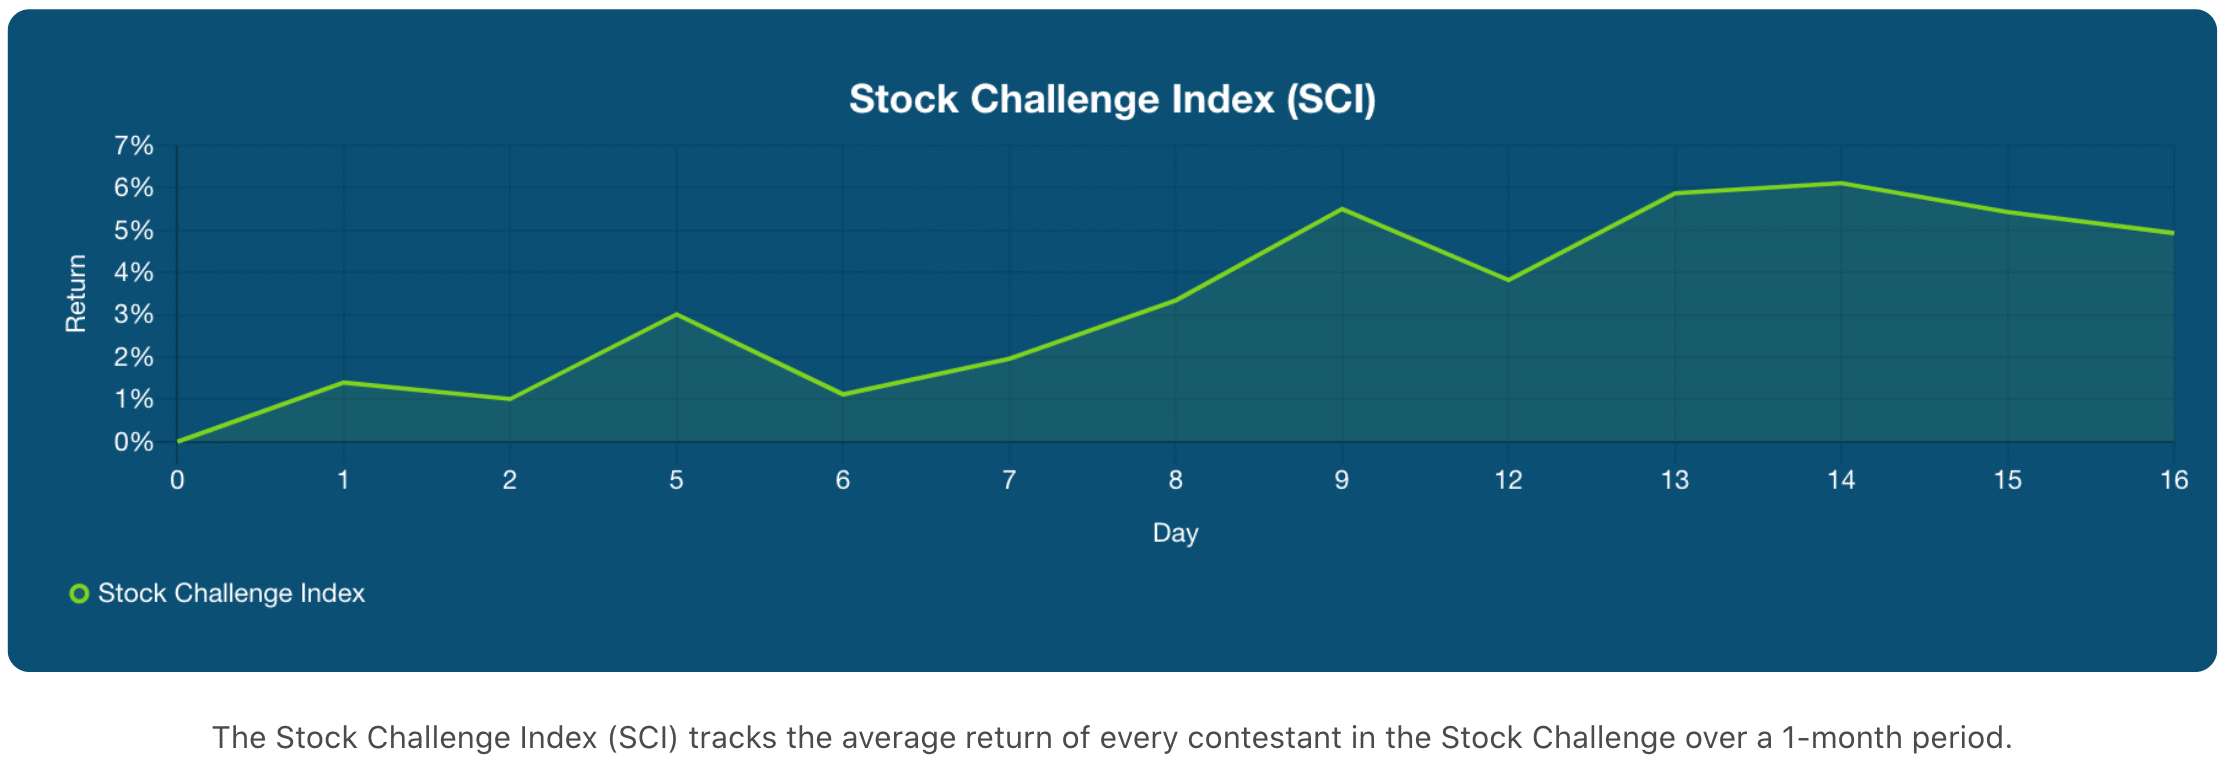 Stock Challenge Index (SCI) as of October 16, 2020